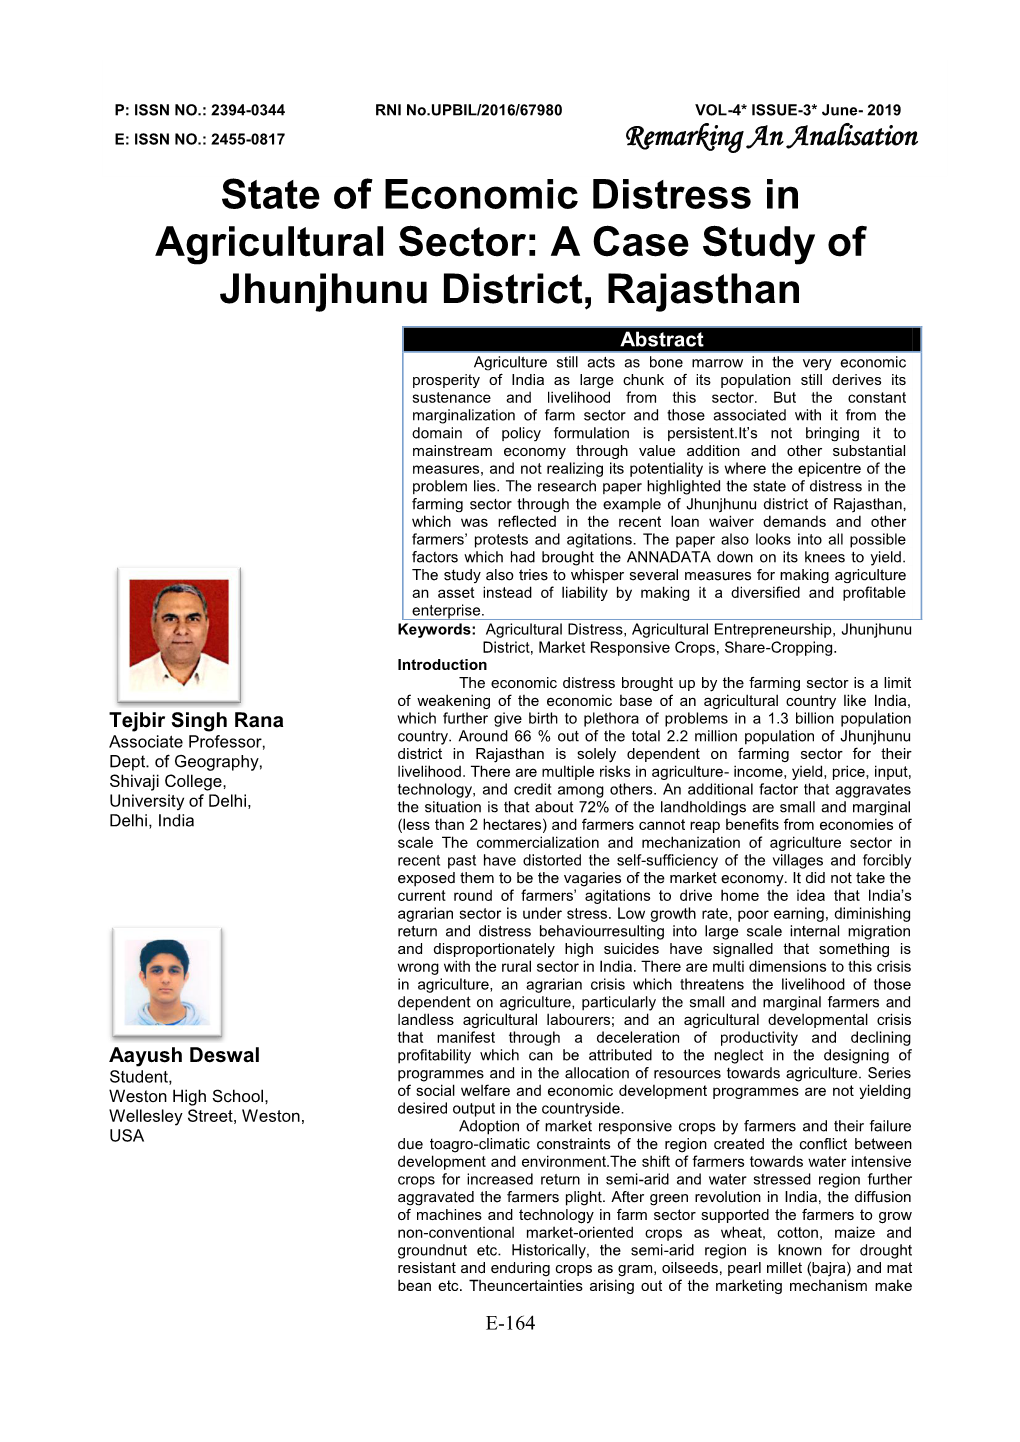 State of Economic Distress in Agricultural Sector